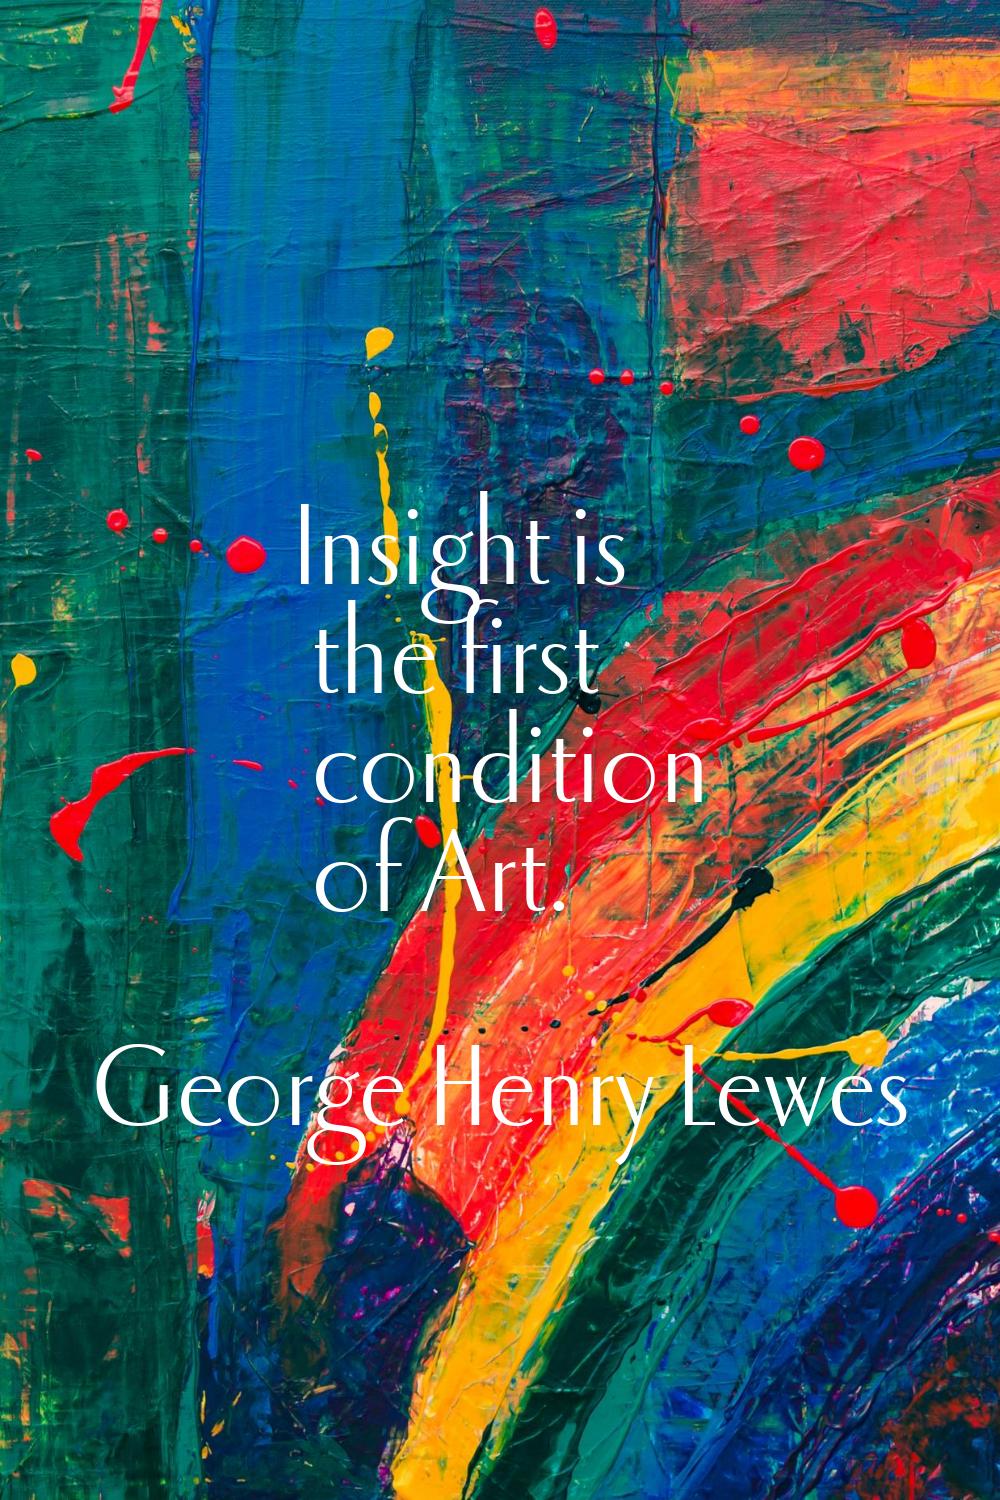 Insight is the first condition of Art.